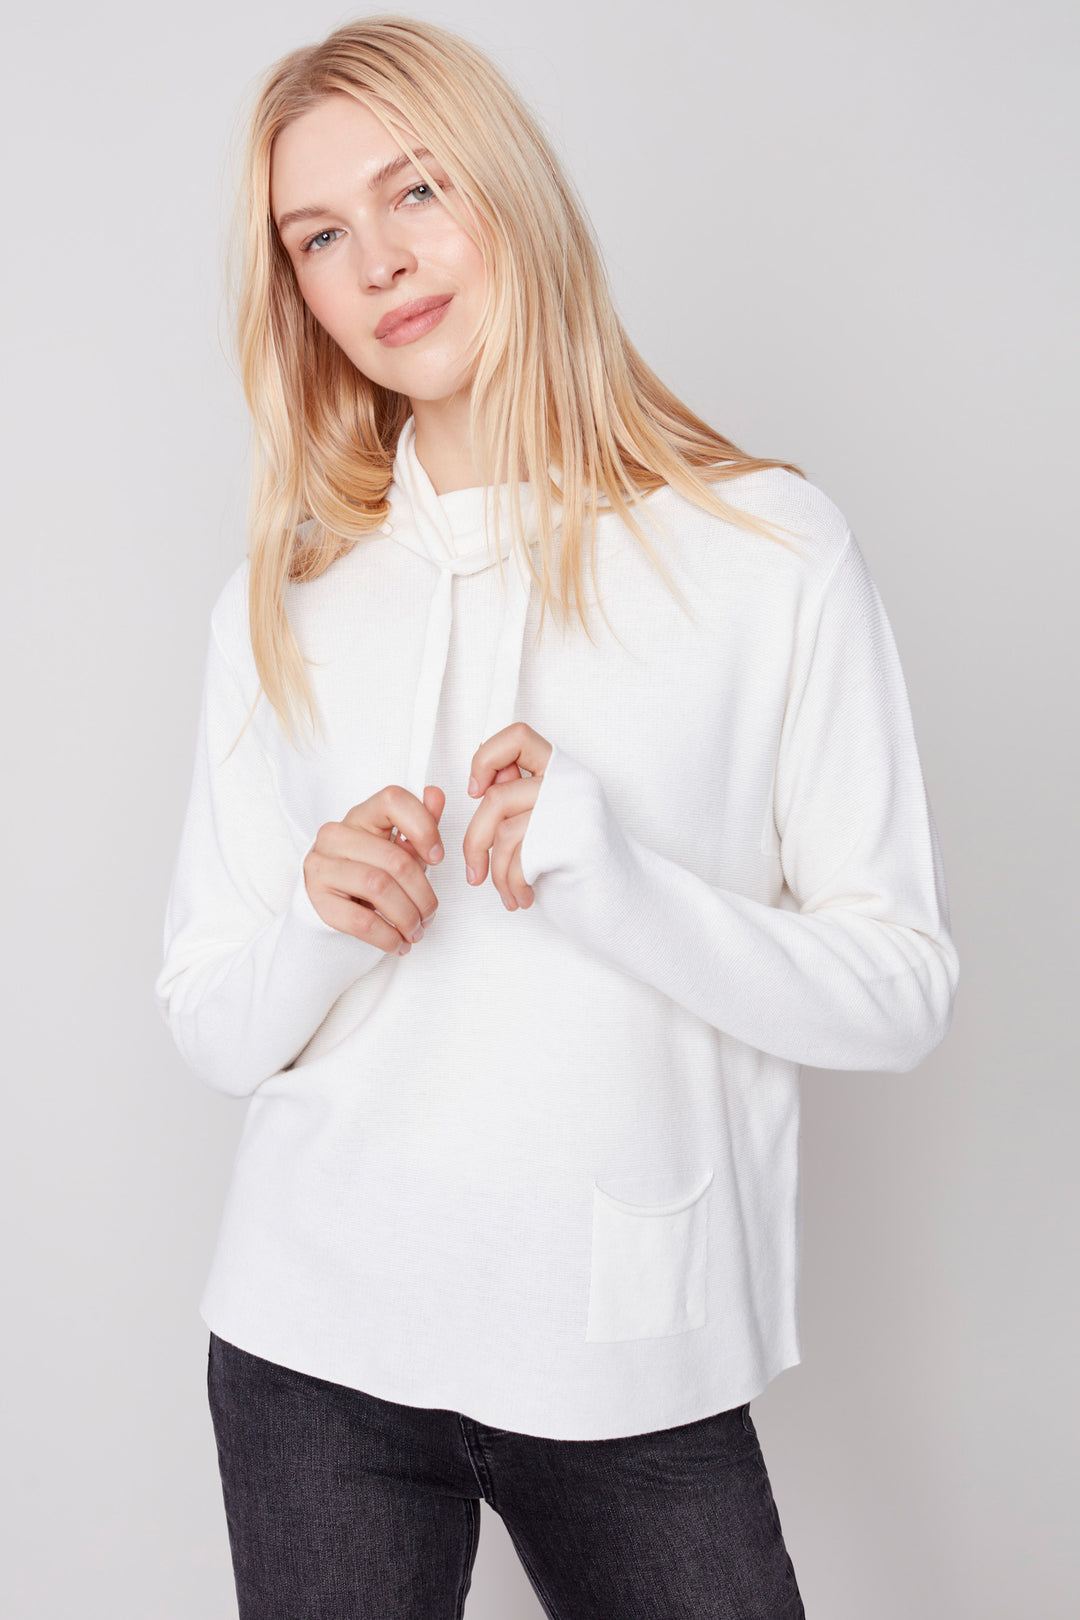 Introducing the Drawstring Neck Top! This luxurious solid ottoman cotton light sweater is designed to keep you warm and cozy without compromising on style. It features a funnel neckline and pocket detailing, adding a contemporary edge. Crafted from 100% cotton it's perfect for your fall and winter wardrobe.  Style and comfort, what more could you need?